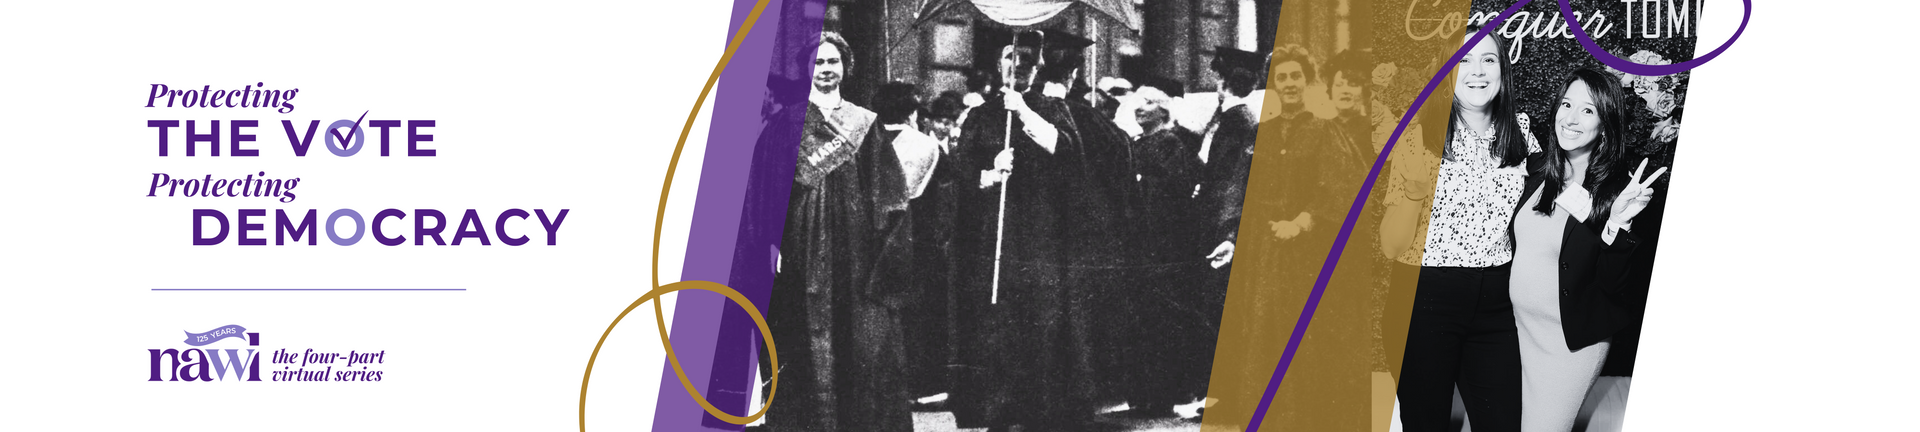 Photos of suffragettes and members throughout NAWL's 125-year history with the logo for the 